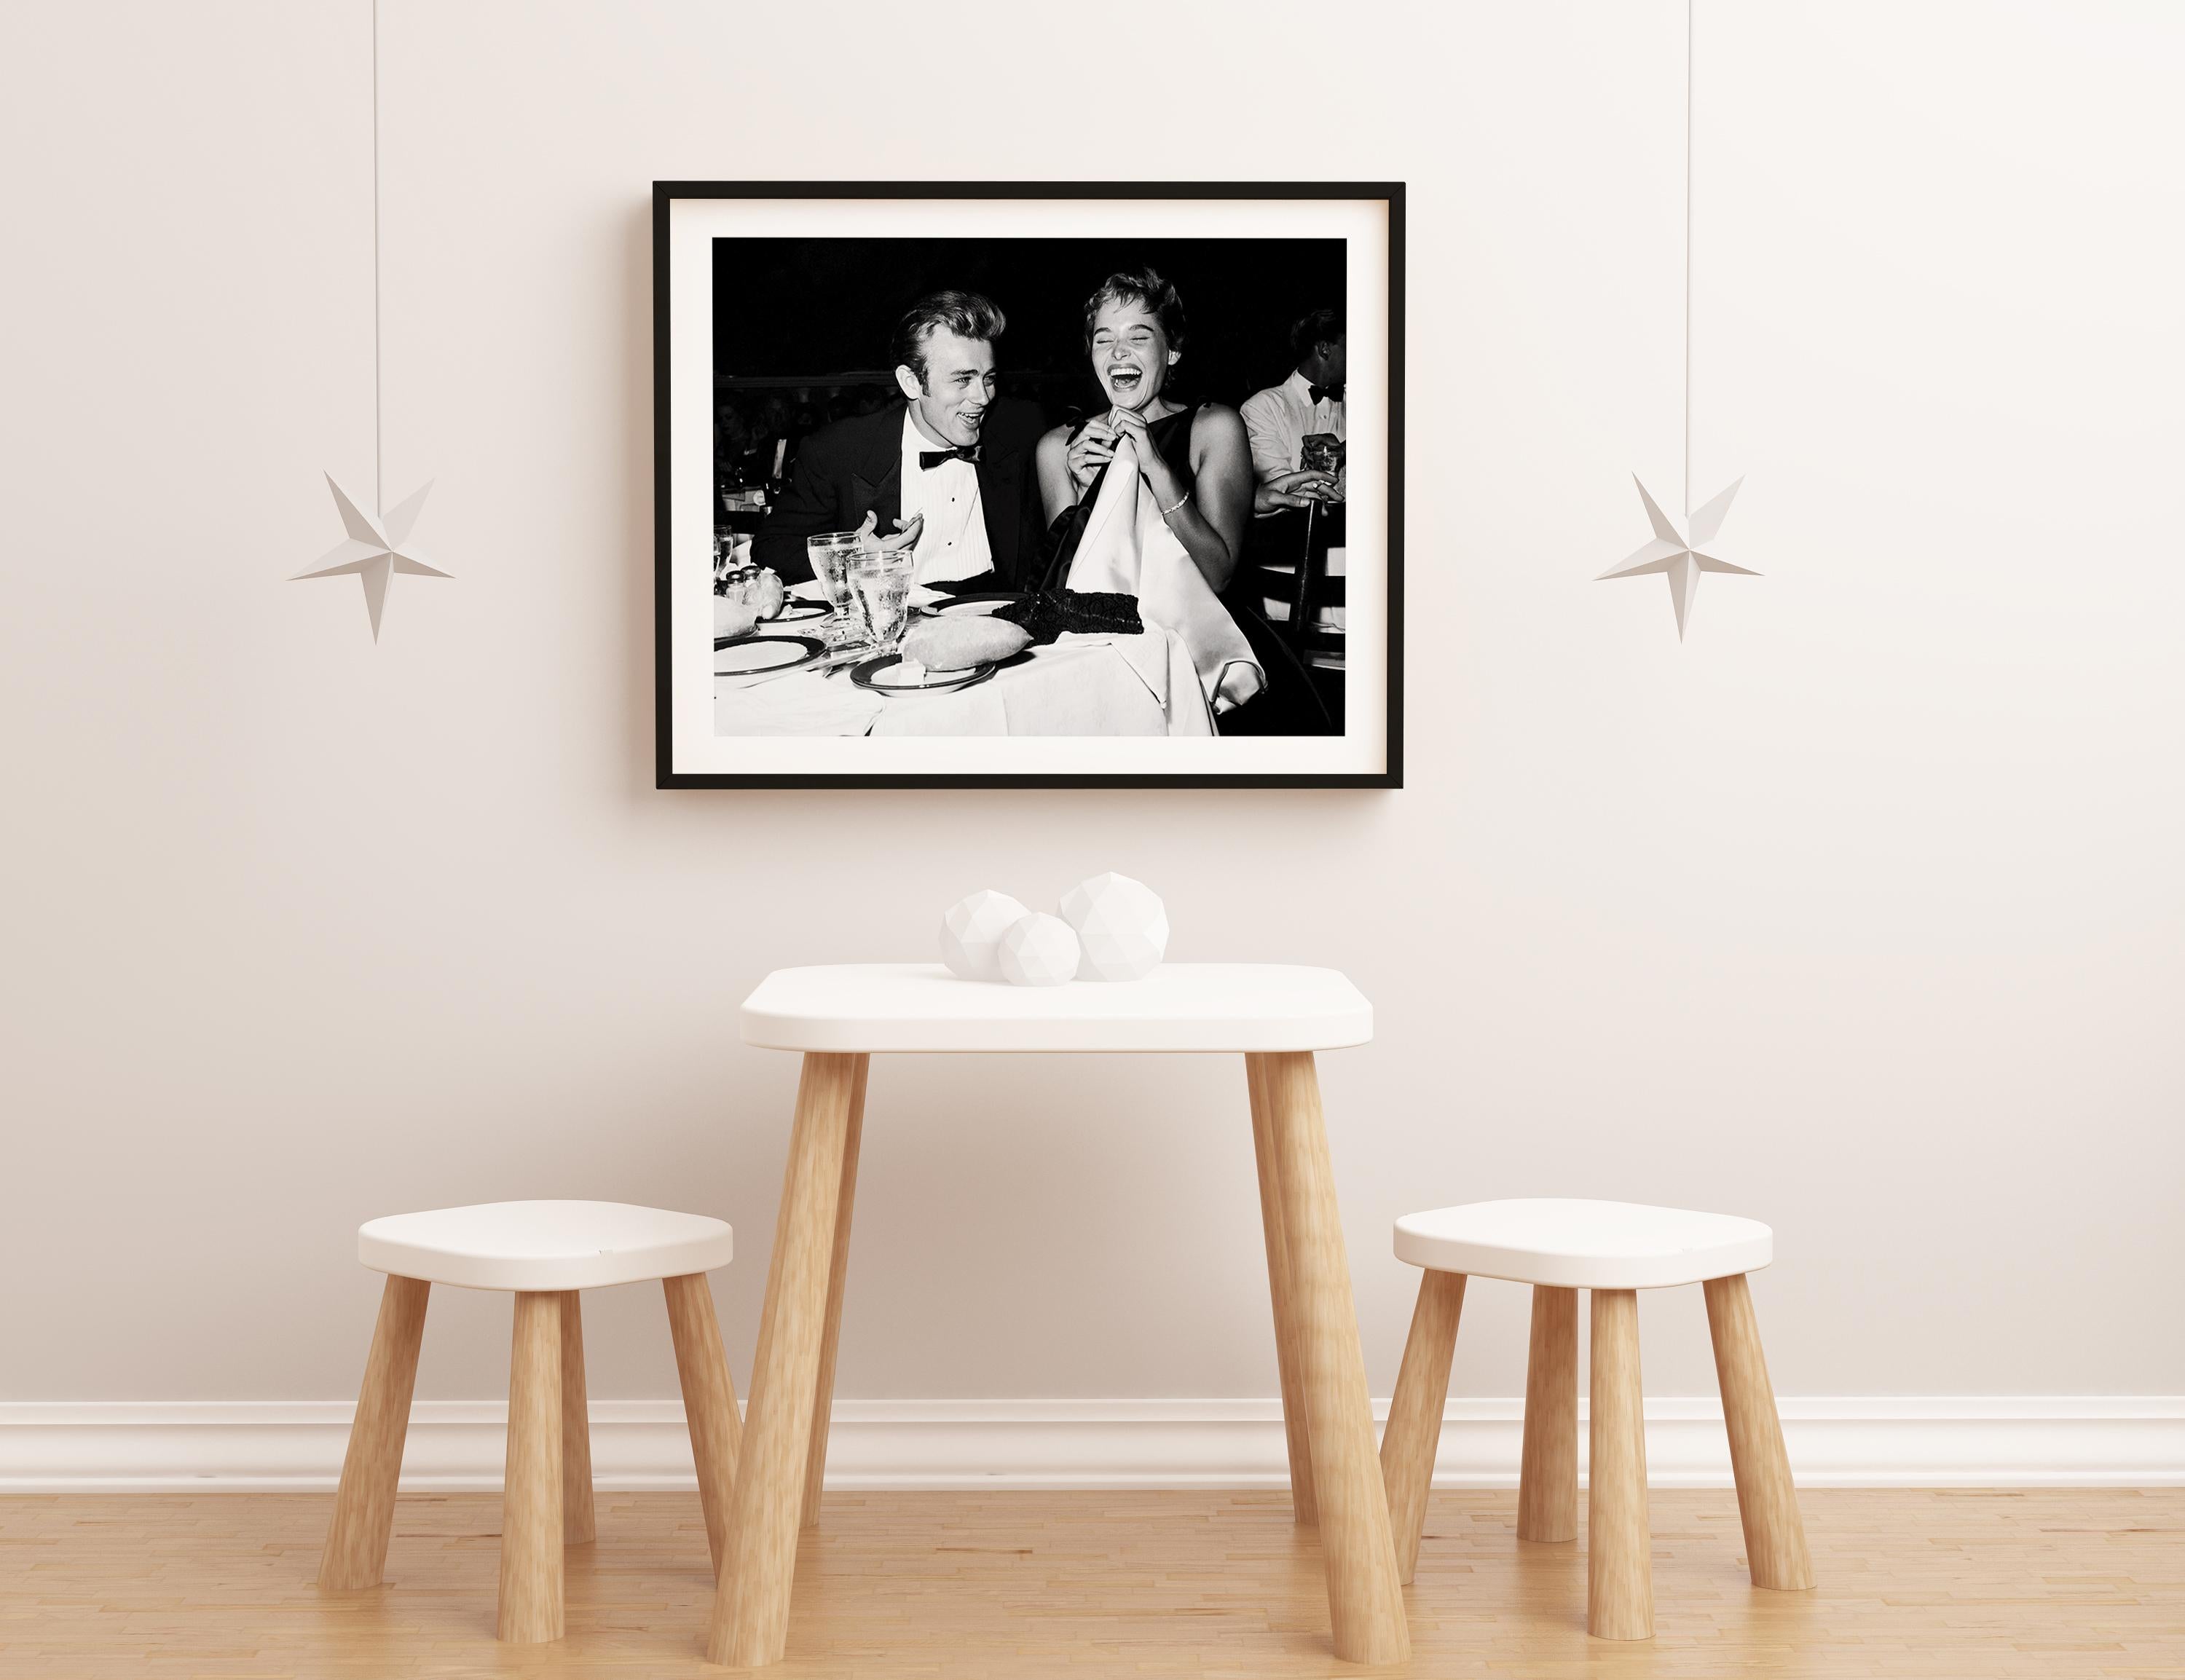 James Dean and Ursula Andress Laughing at Dinner Globe Photos Fine Art Print - Black Black and White Photograph by Unknown